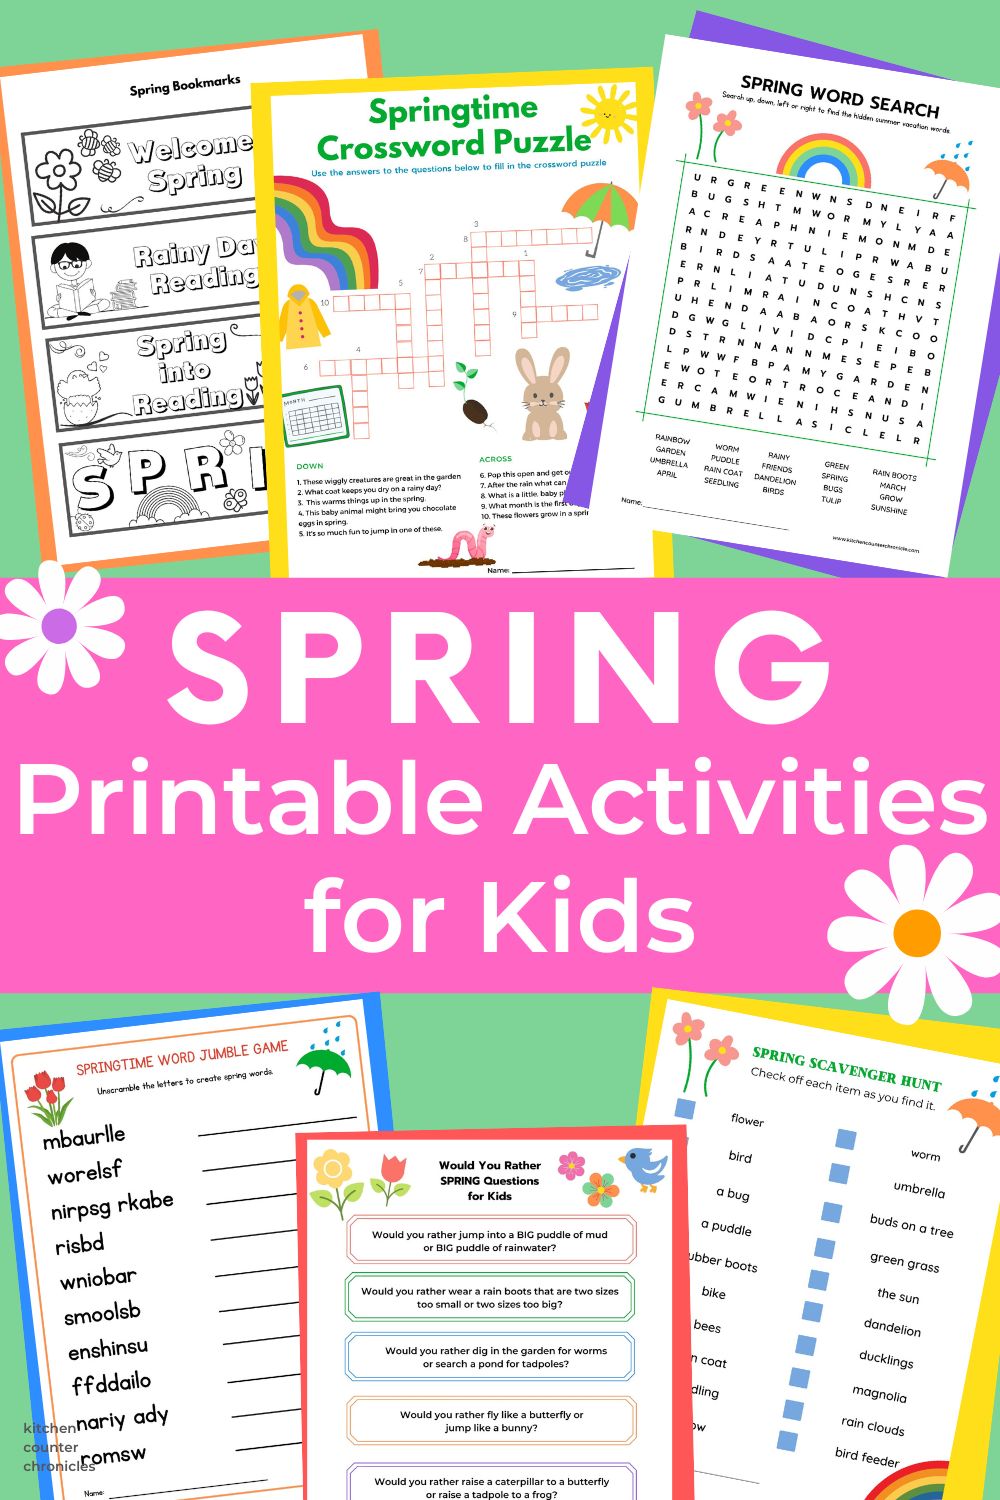 collage of spring printable activities and games, word search, crossword puzzle, bookmarks, scavenger hunt, and title "Spring Printable Activities for Kids"